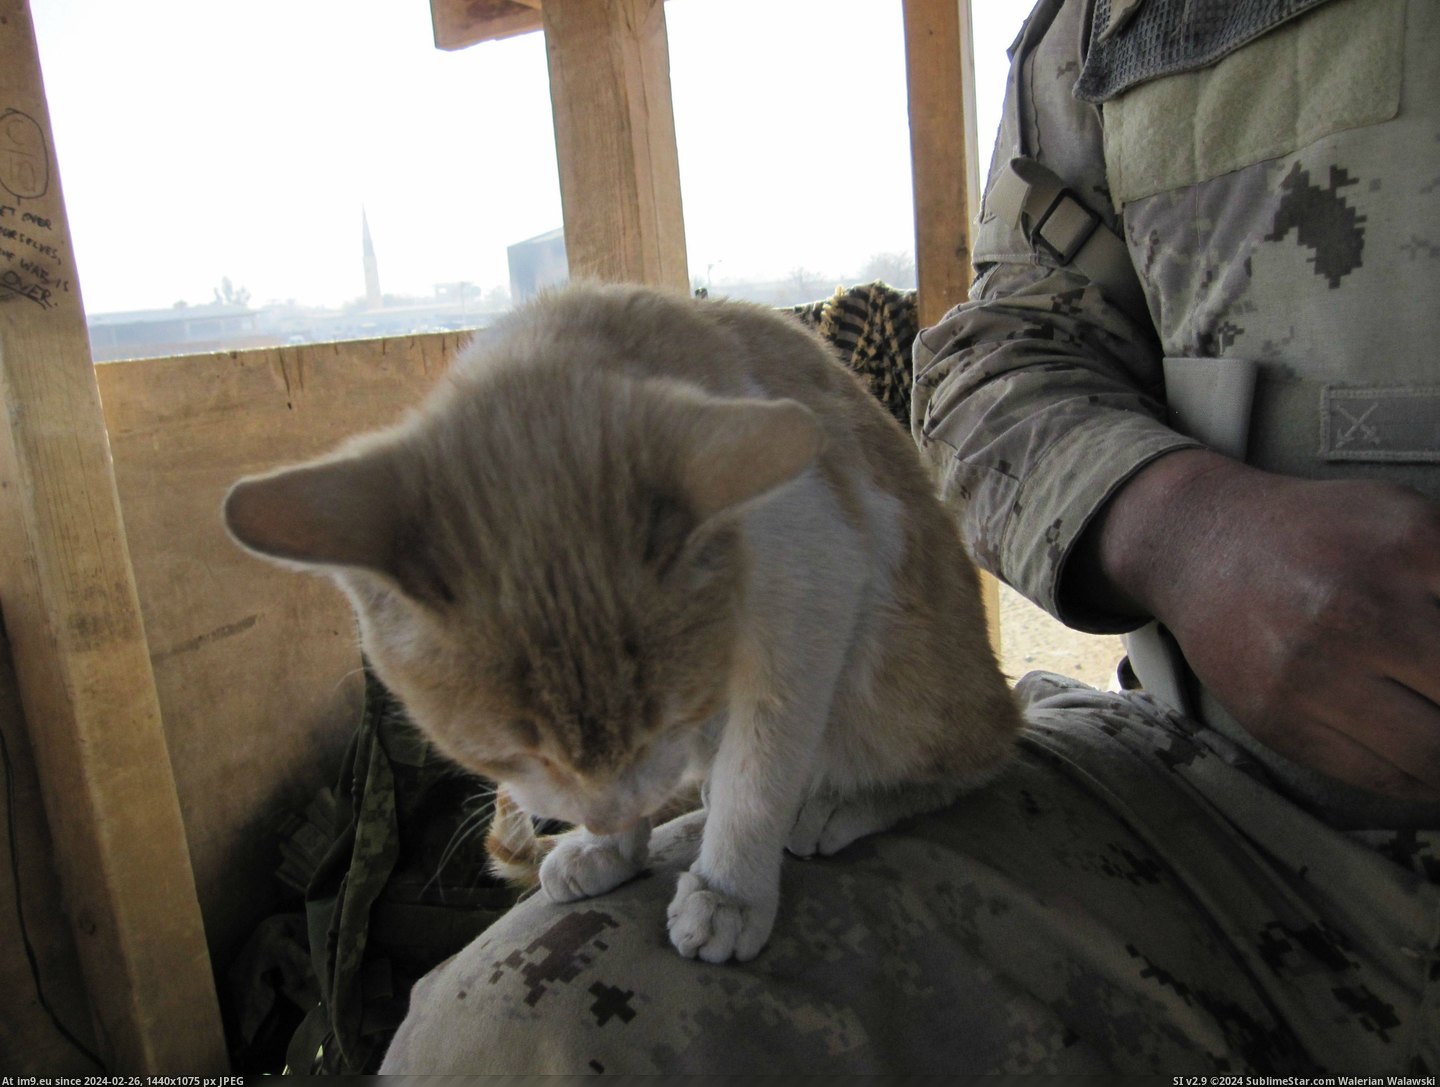 #Cats #Guard #Camp #Afghanistan #Cheetah #Tower #Helping [Cats] Tower Cheetah helping me guard my camp in Afghanistan. 3 Pic. (Image of album My r/CATS favs))